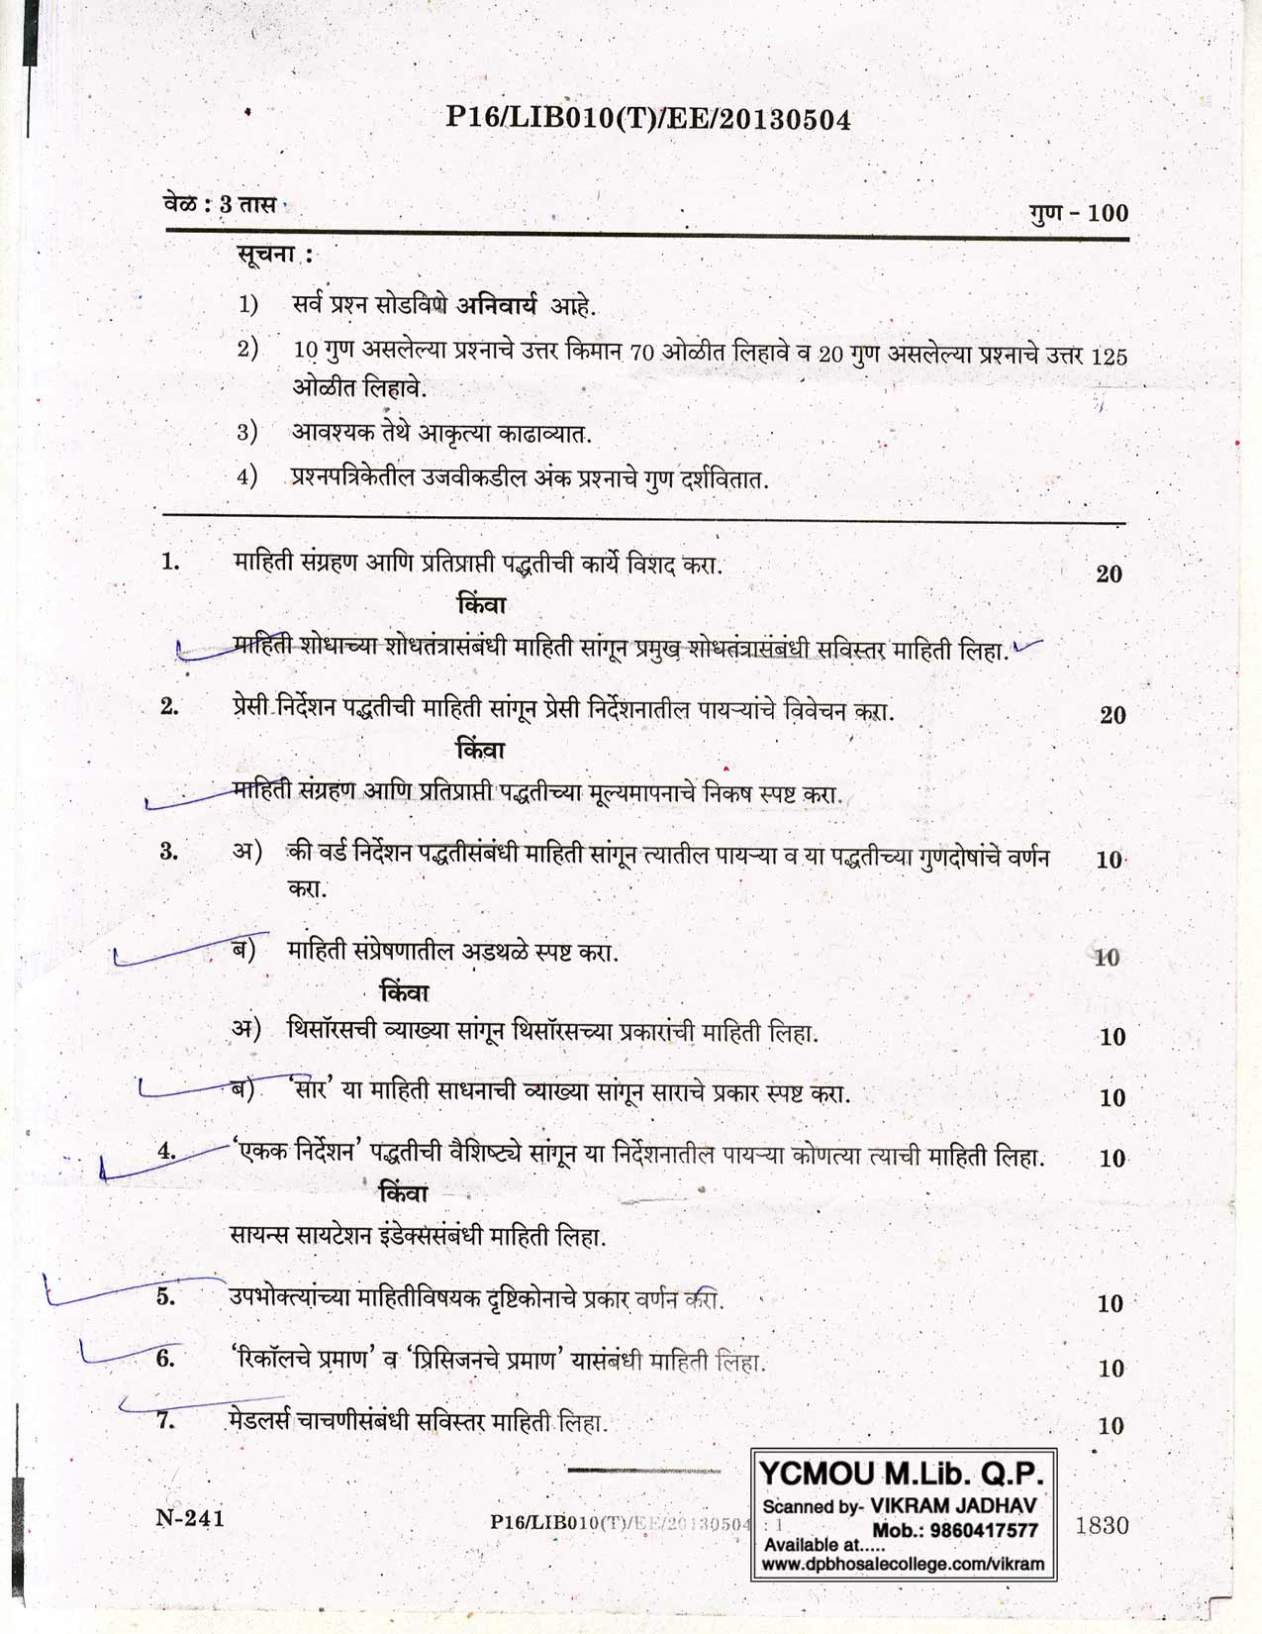 ycmou home assignment question paper